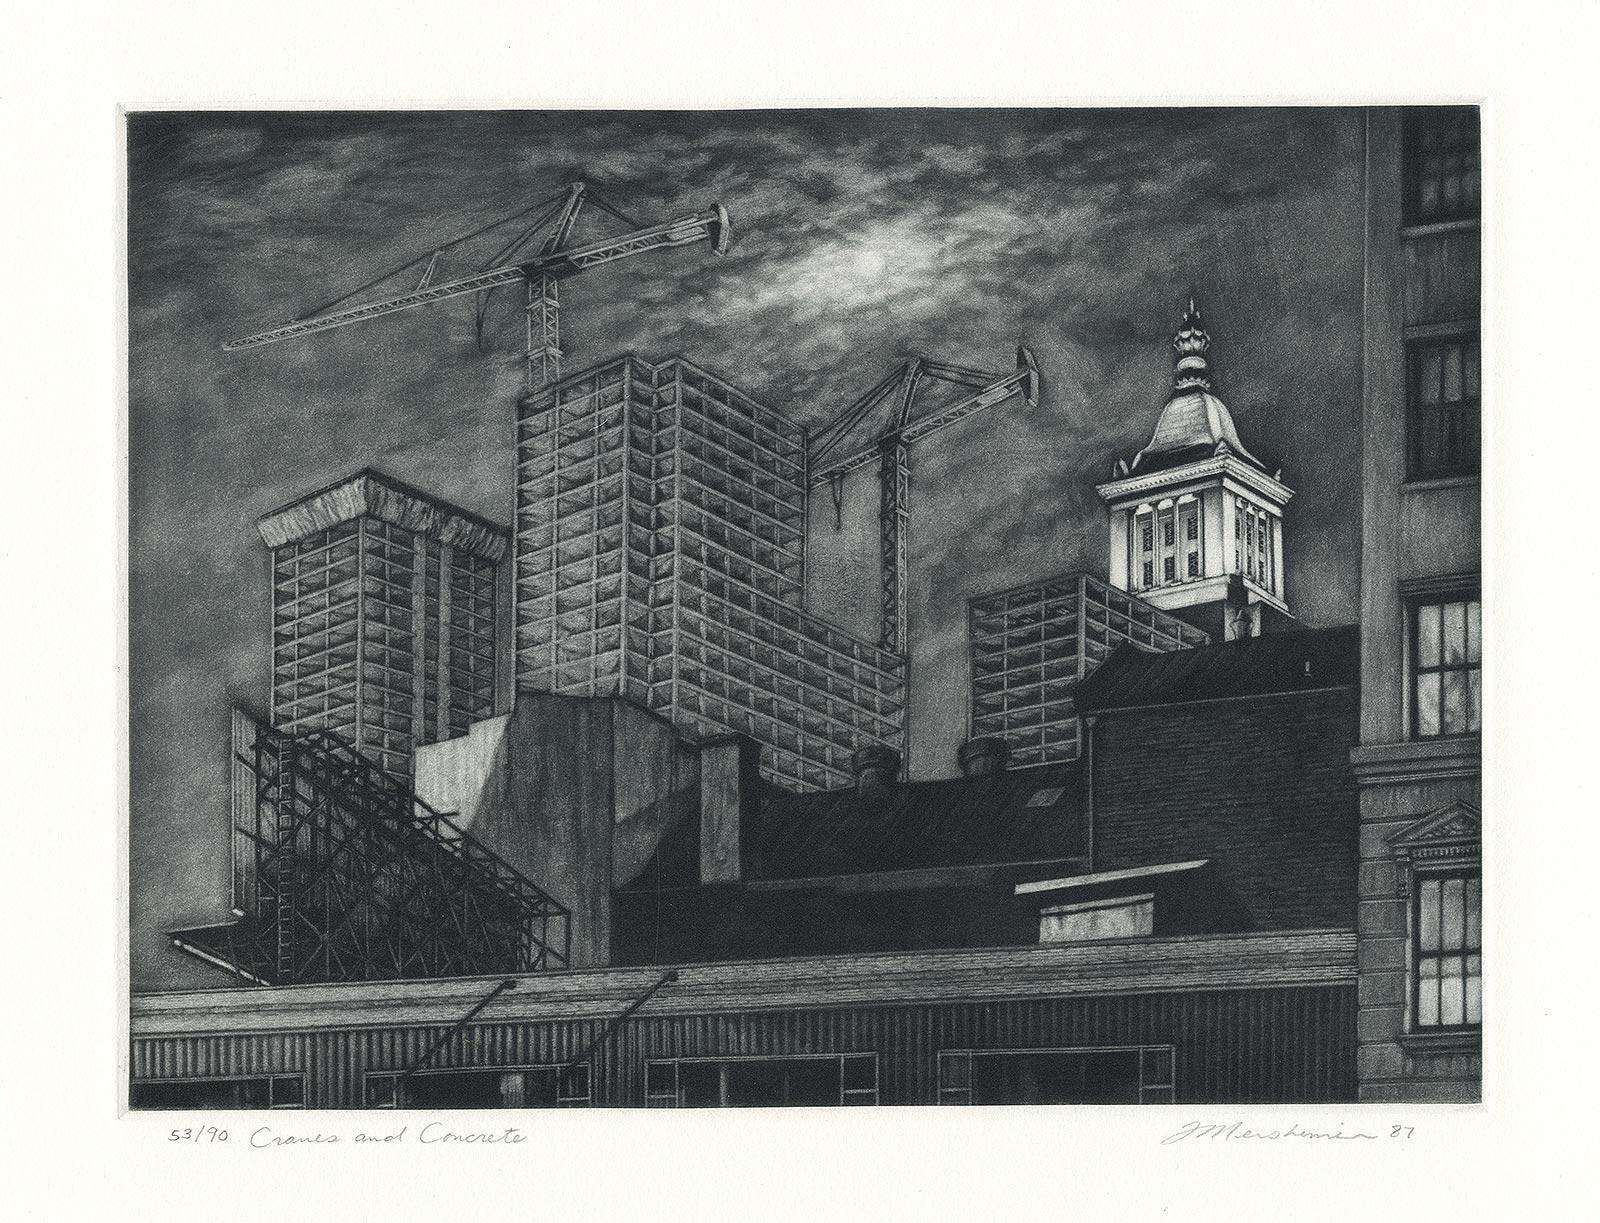 Cranes and Concrete (in the 80s, a boom saw buildings racing into the sky? - Print by Frederick Mershimer